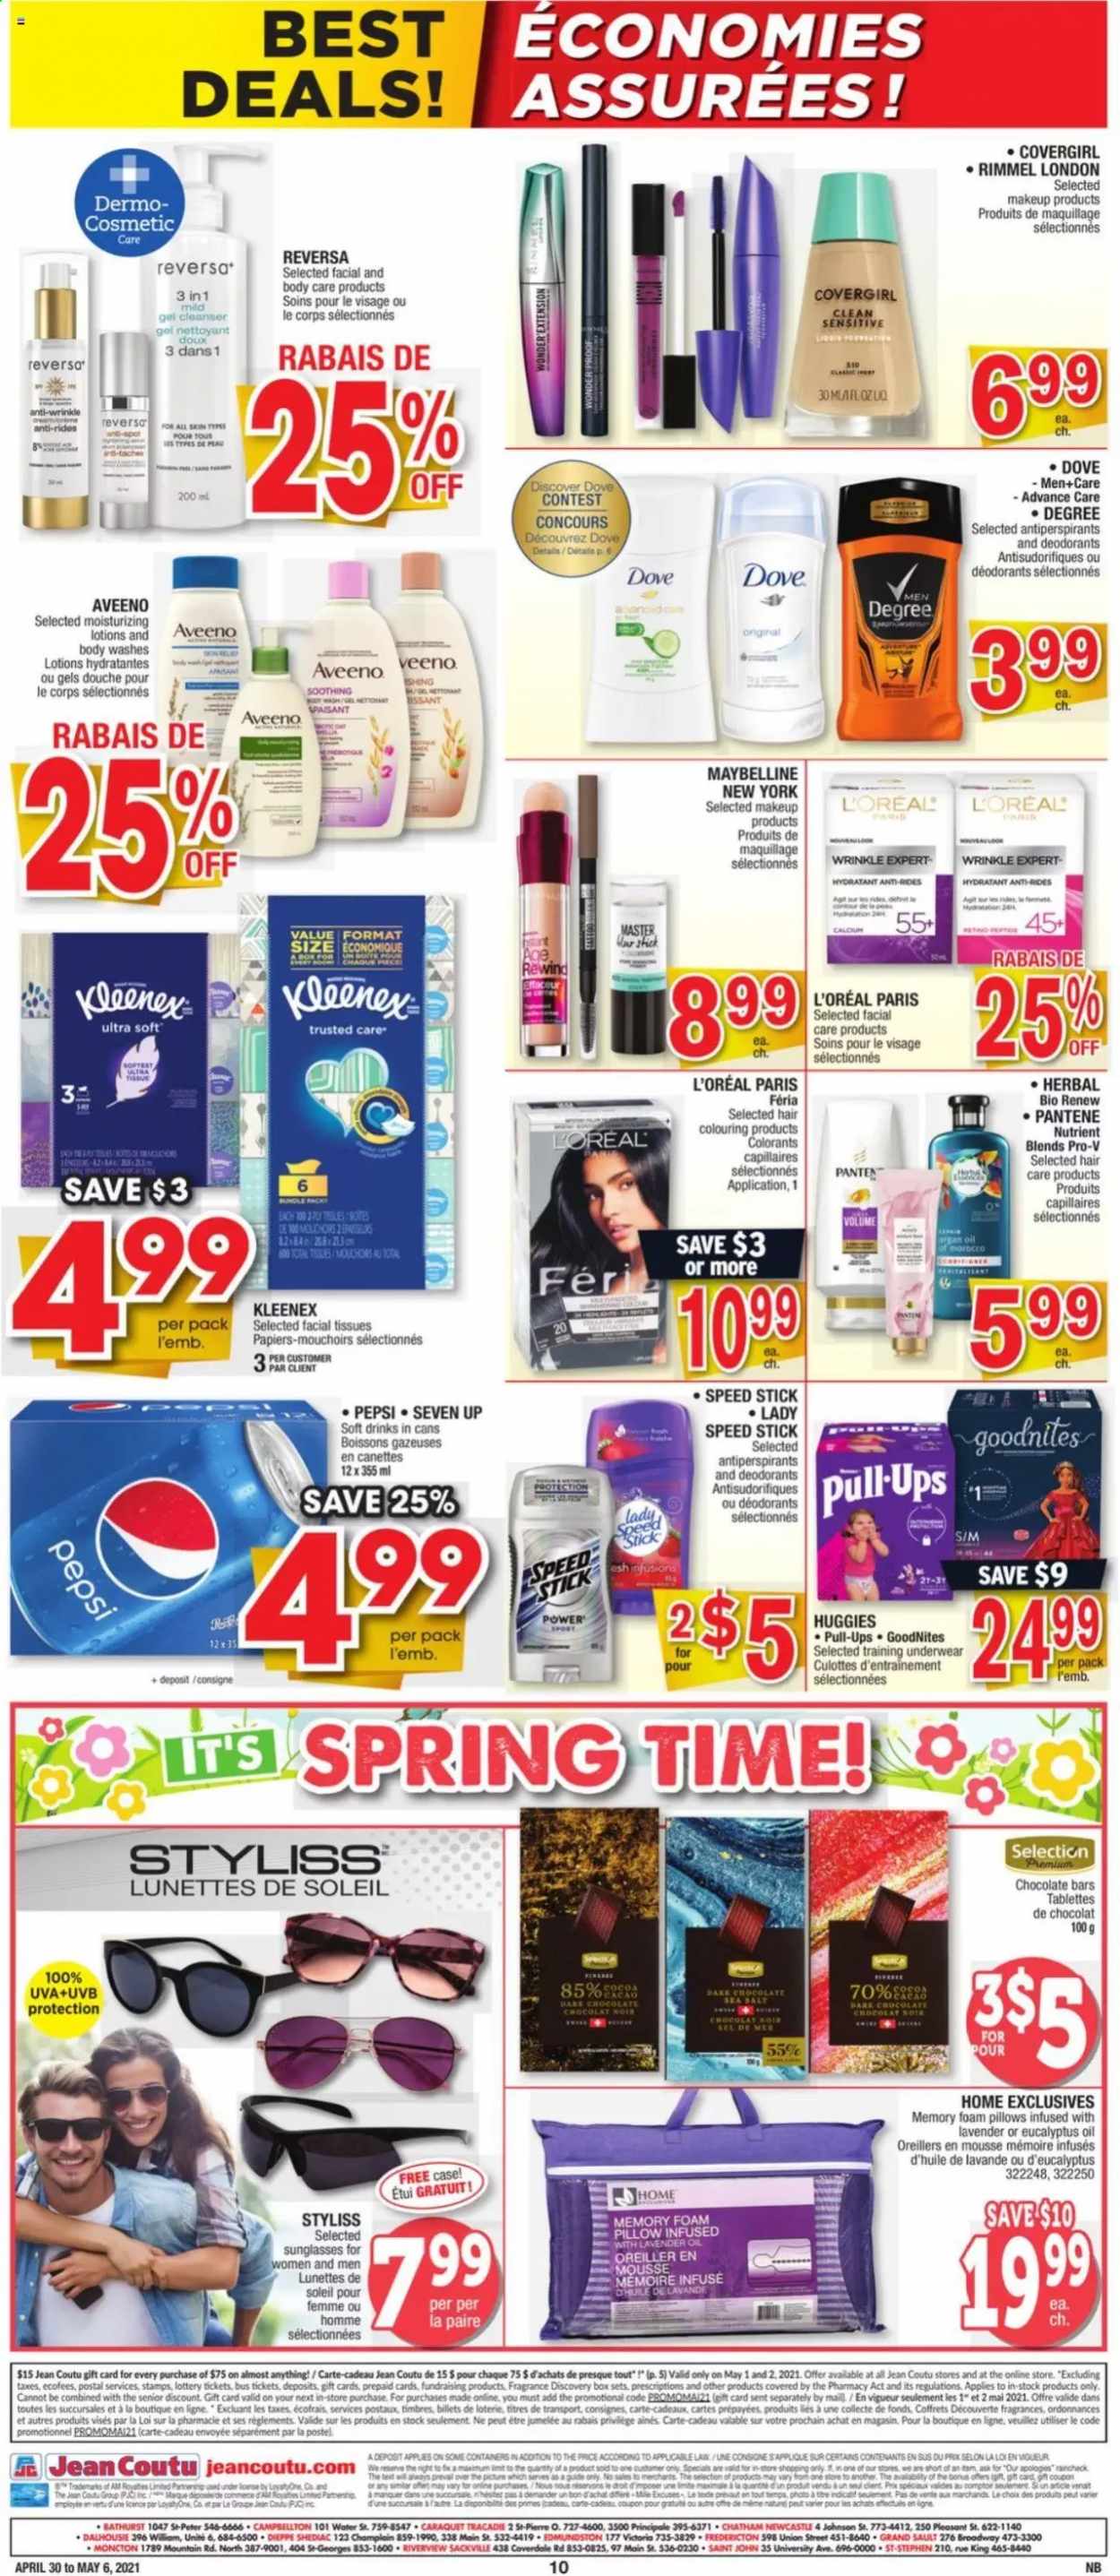 thumbnail - Jean Coutu Flyer - April 29, 2021 - May 05, 2021 - Sales products - chocolate bar, sea salt, oil, Pepsi, soft drink, 7UP, Johnson's, Aveeno, Kleenex, tissues, cleanser, facial tissues, L’Oréal, fragrance, Speed Stick, makeup, Rimmel, pillow, foam pillow, sunglasses, Maybelline, Huggies, Pantene, deodorant. Page 7.